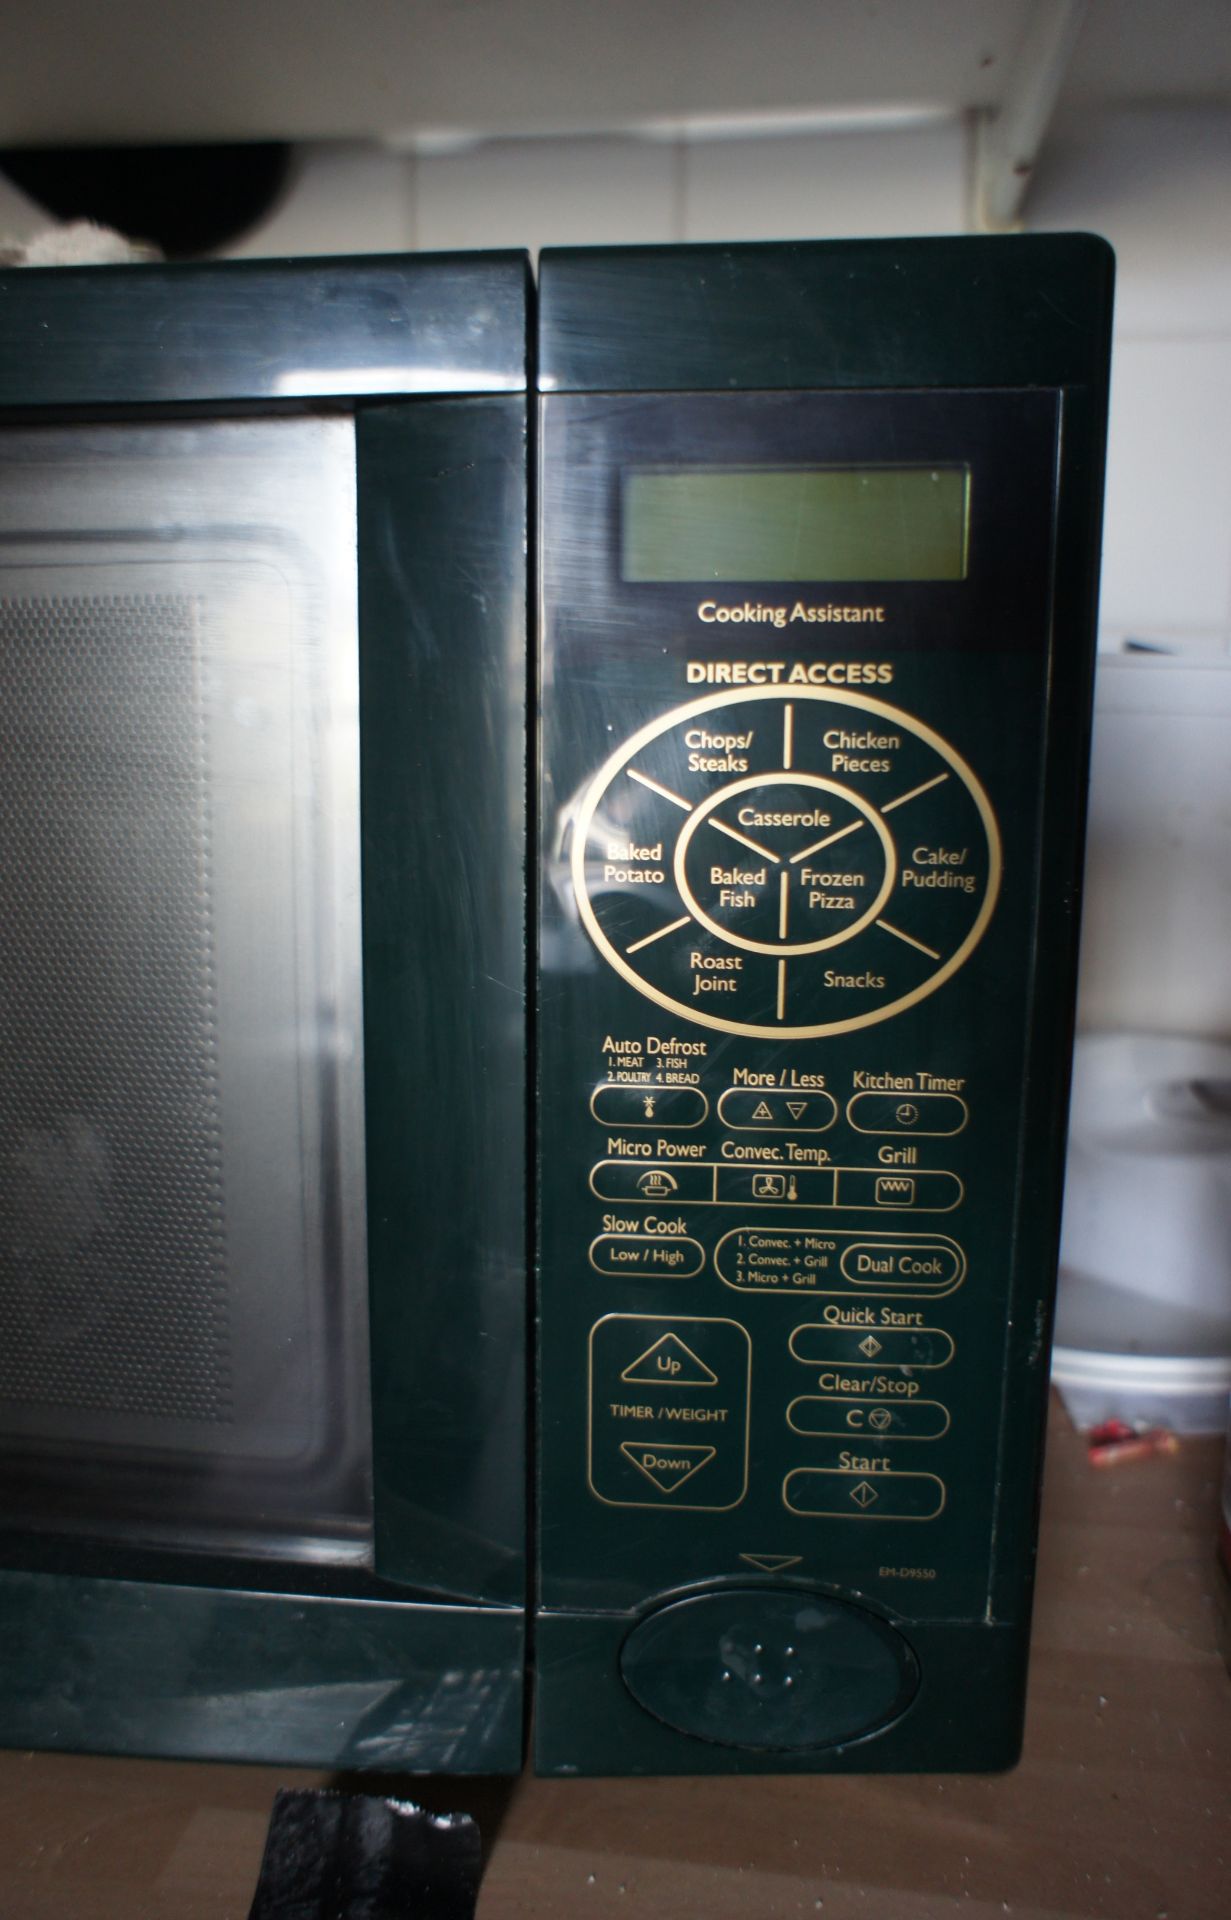 Sanyo EM-D9550 cooking assistant - Image 3 of 3